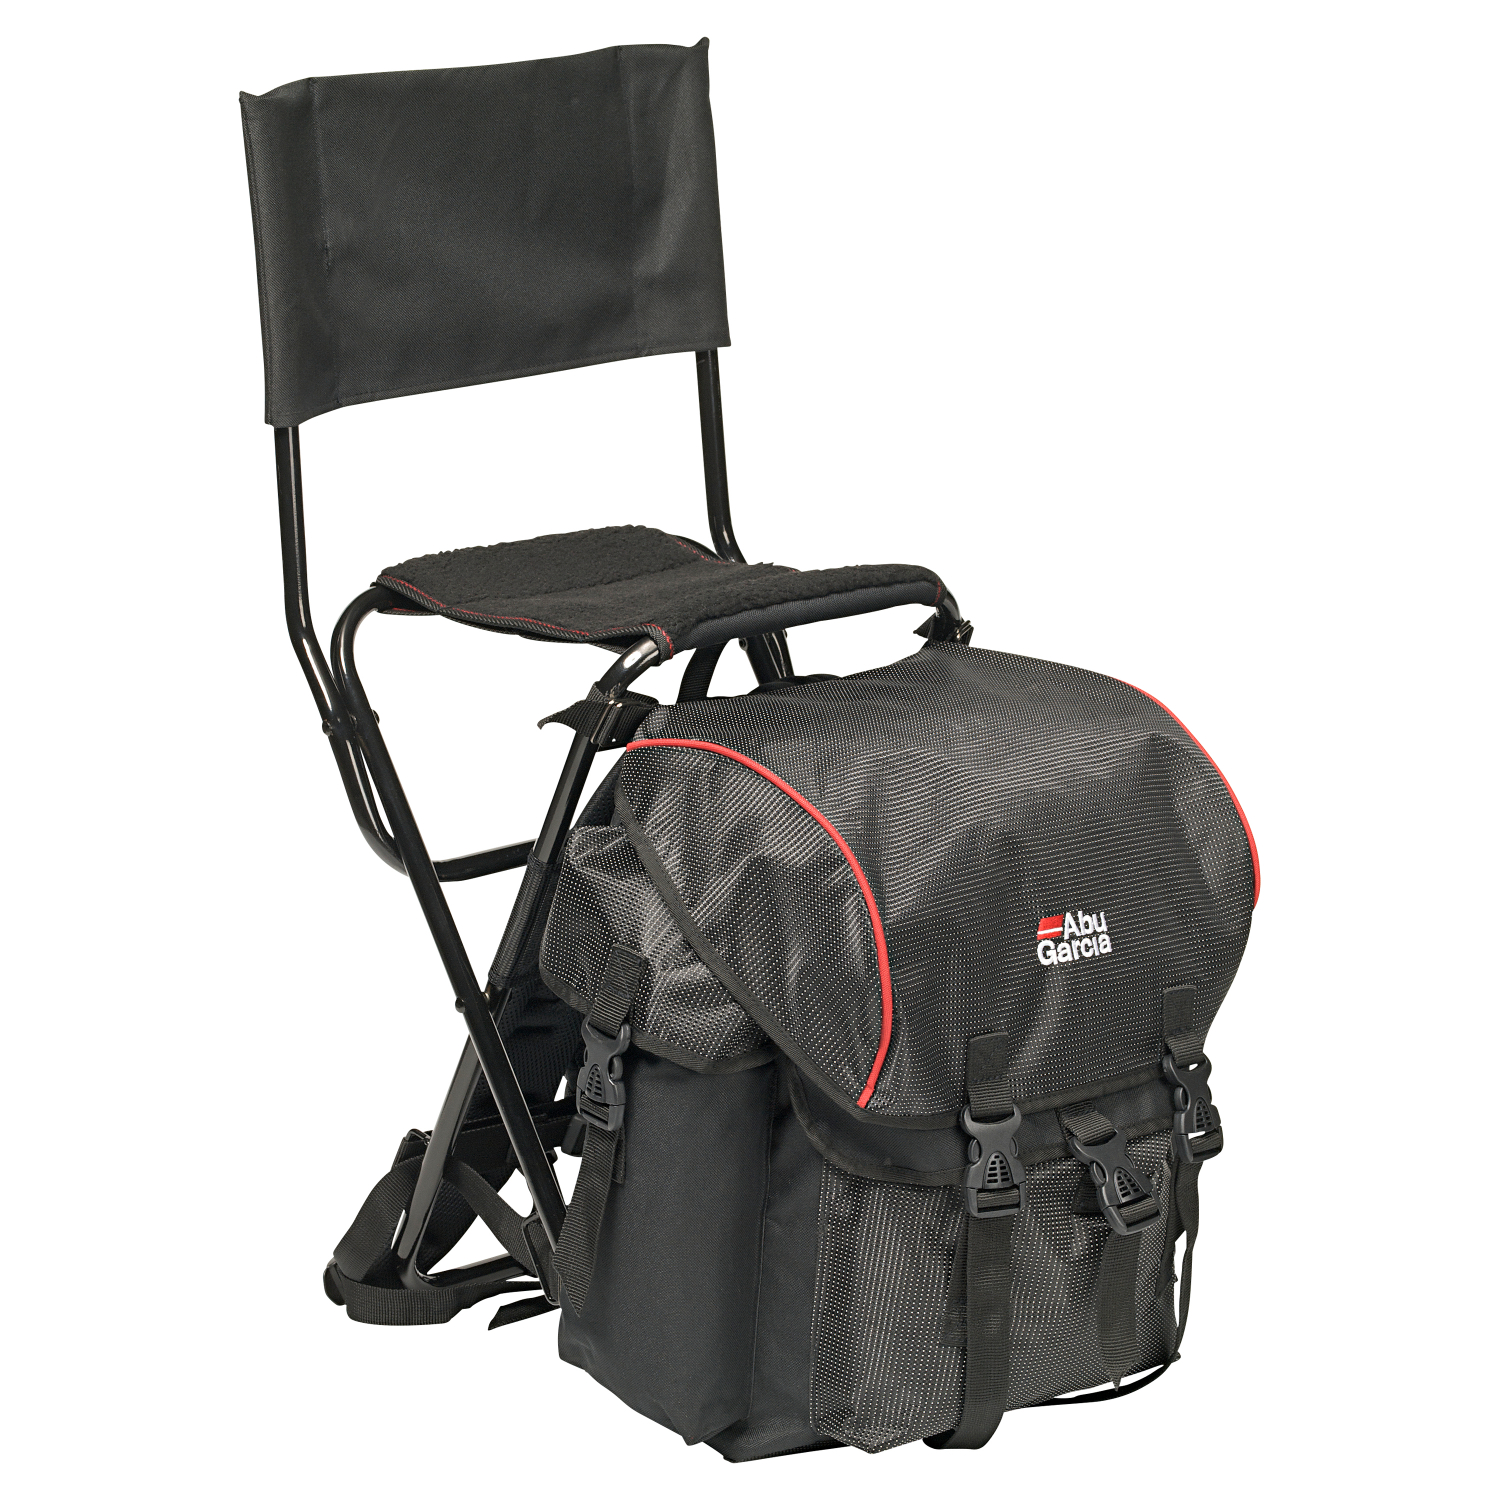 Abu Garcia Backpack Chair at low prices